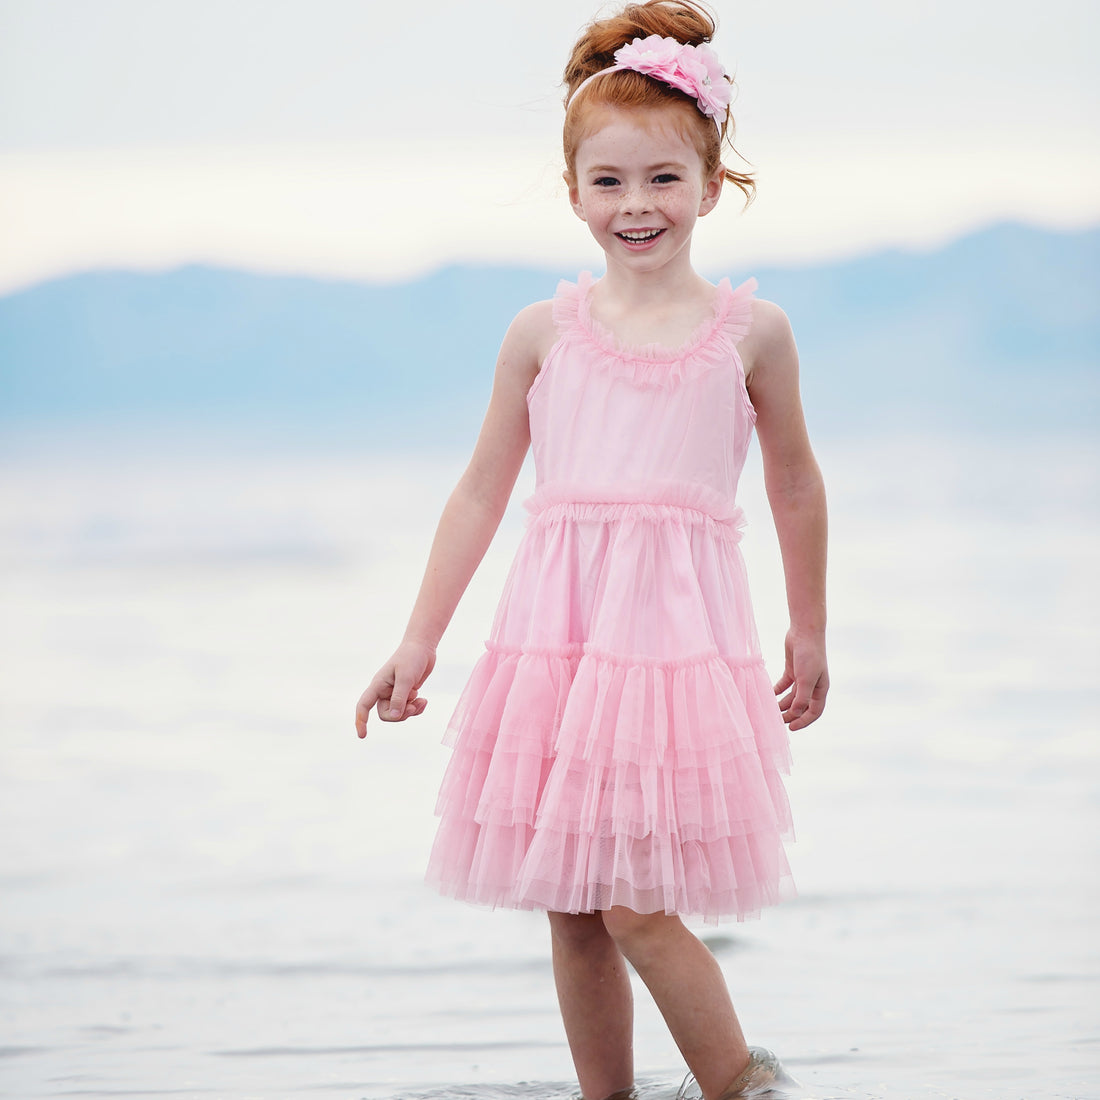 Pretty in Pink Tulle Dress - Think Pink Bows - 2